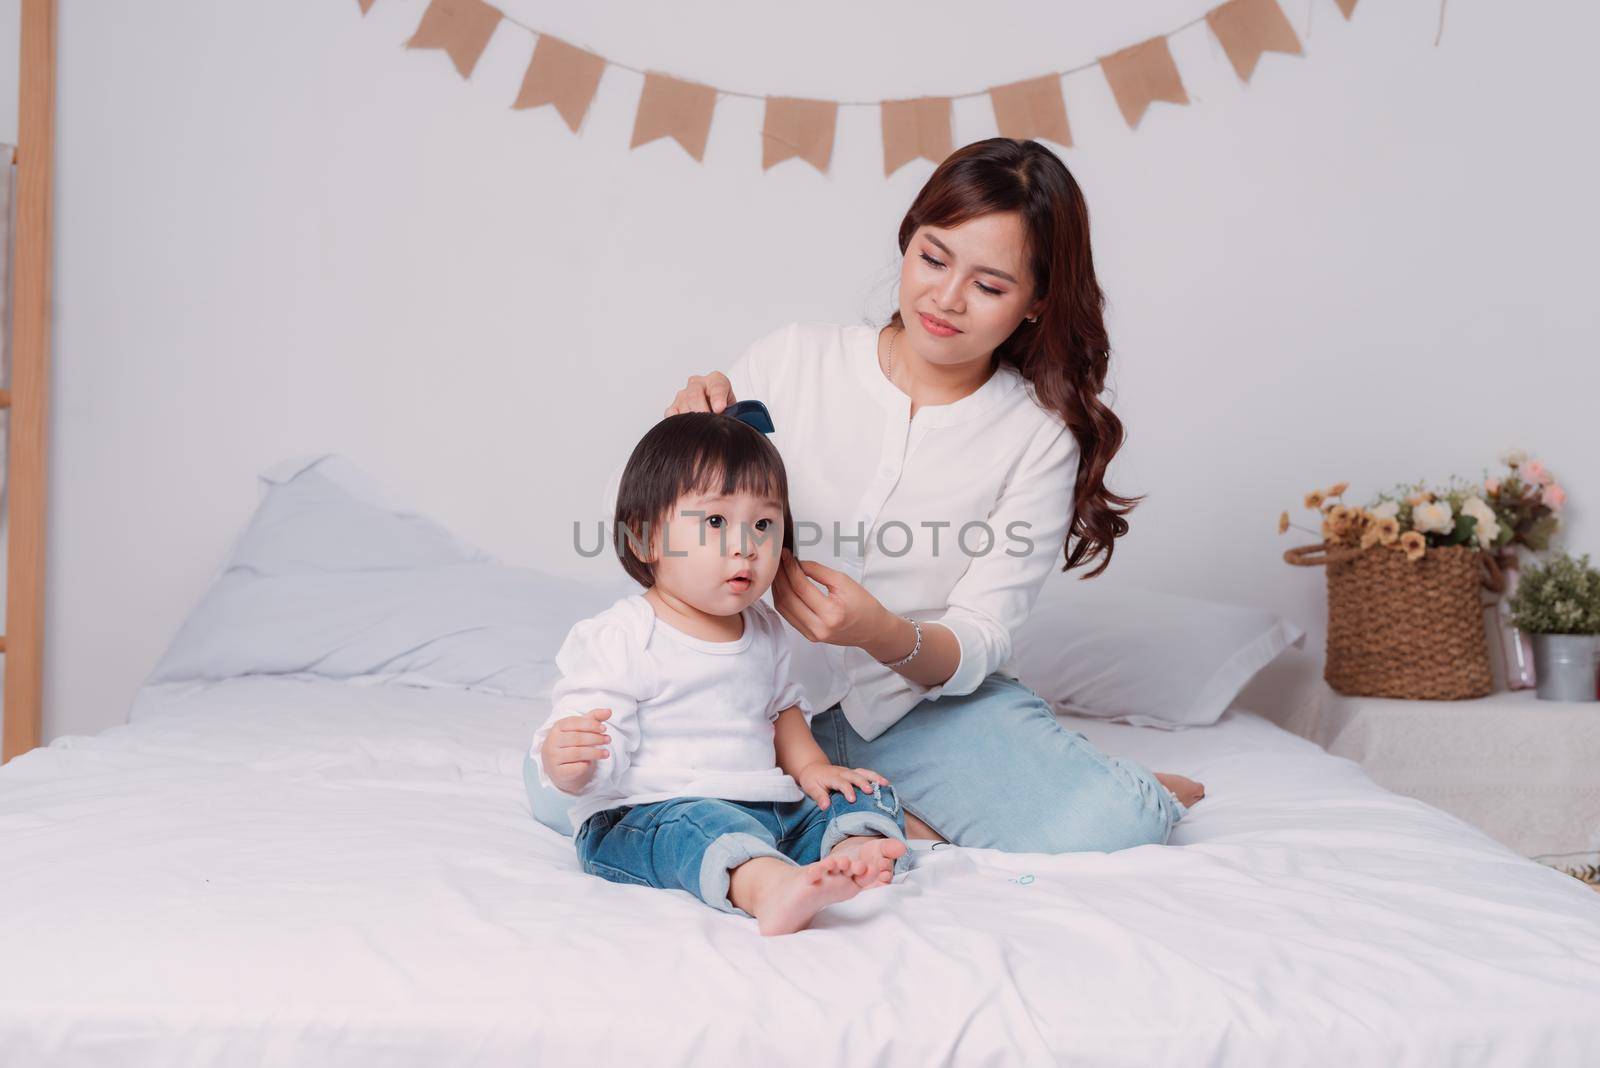 Mother combing her little daughters hair on the bed in bed room.